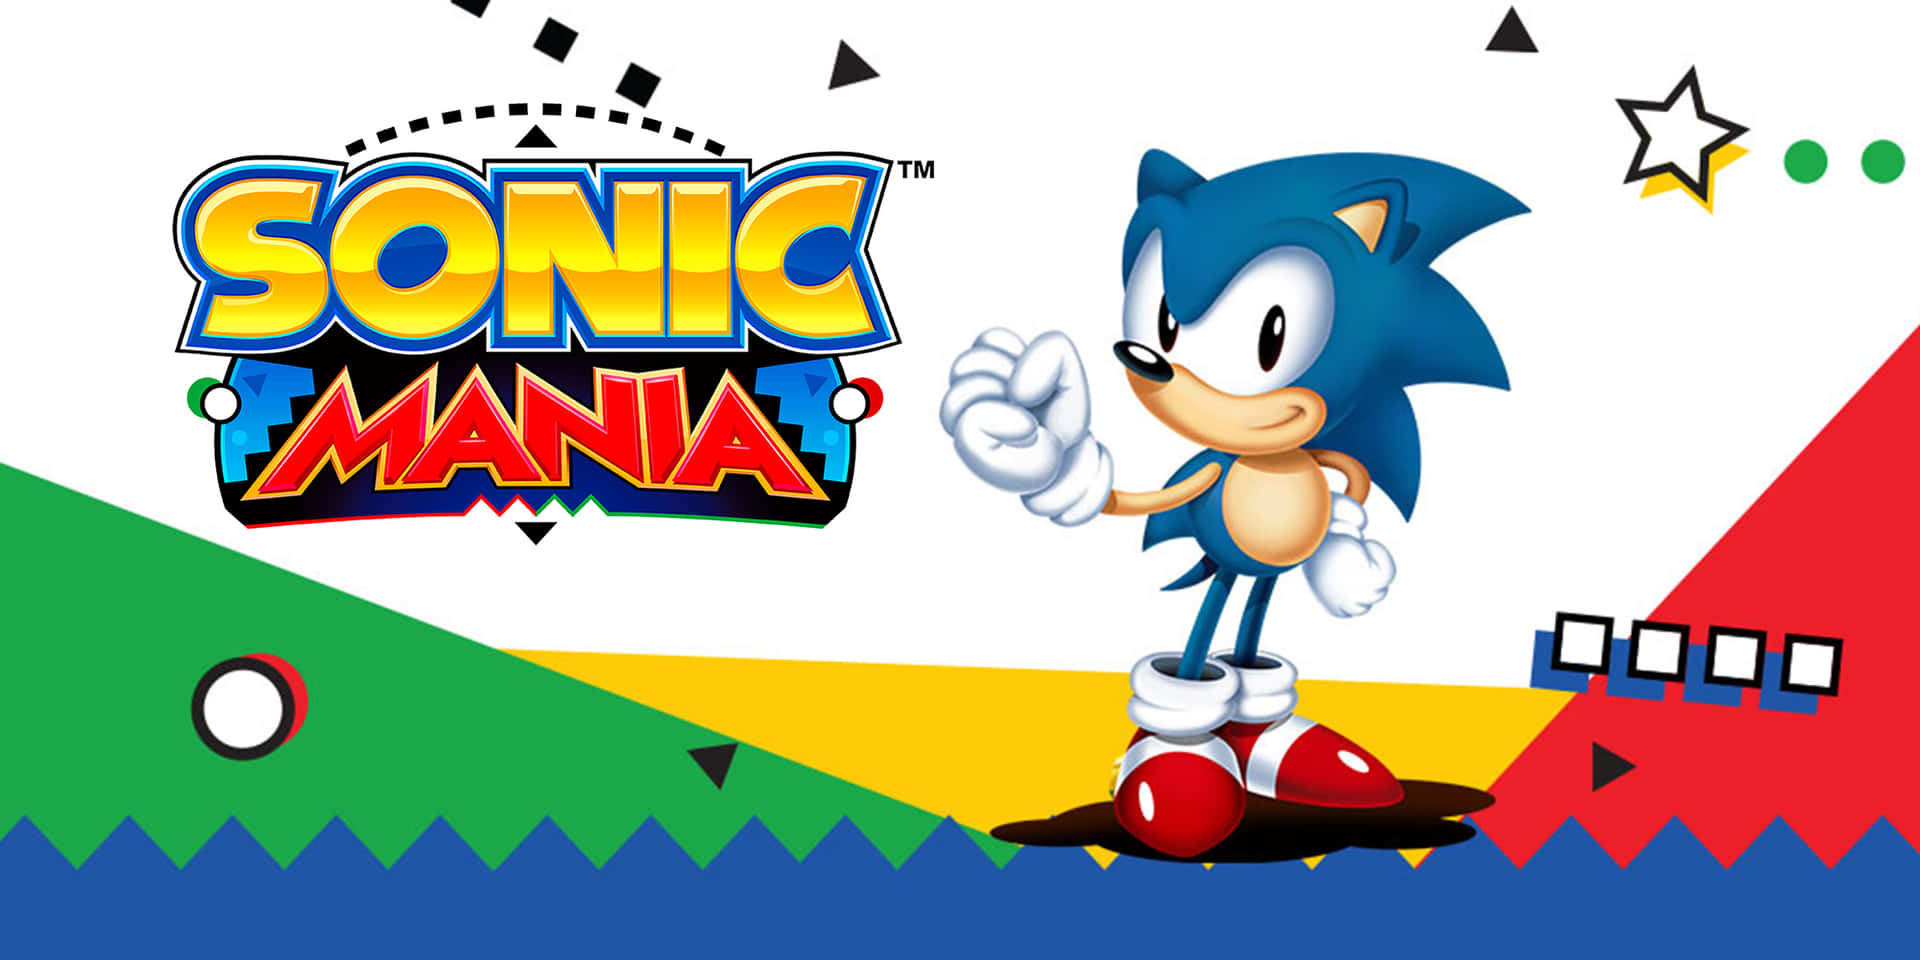 Classic Sonic in action on a thrilling adventure Wallpaper